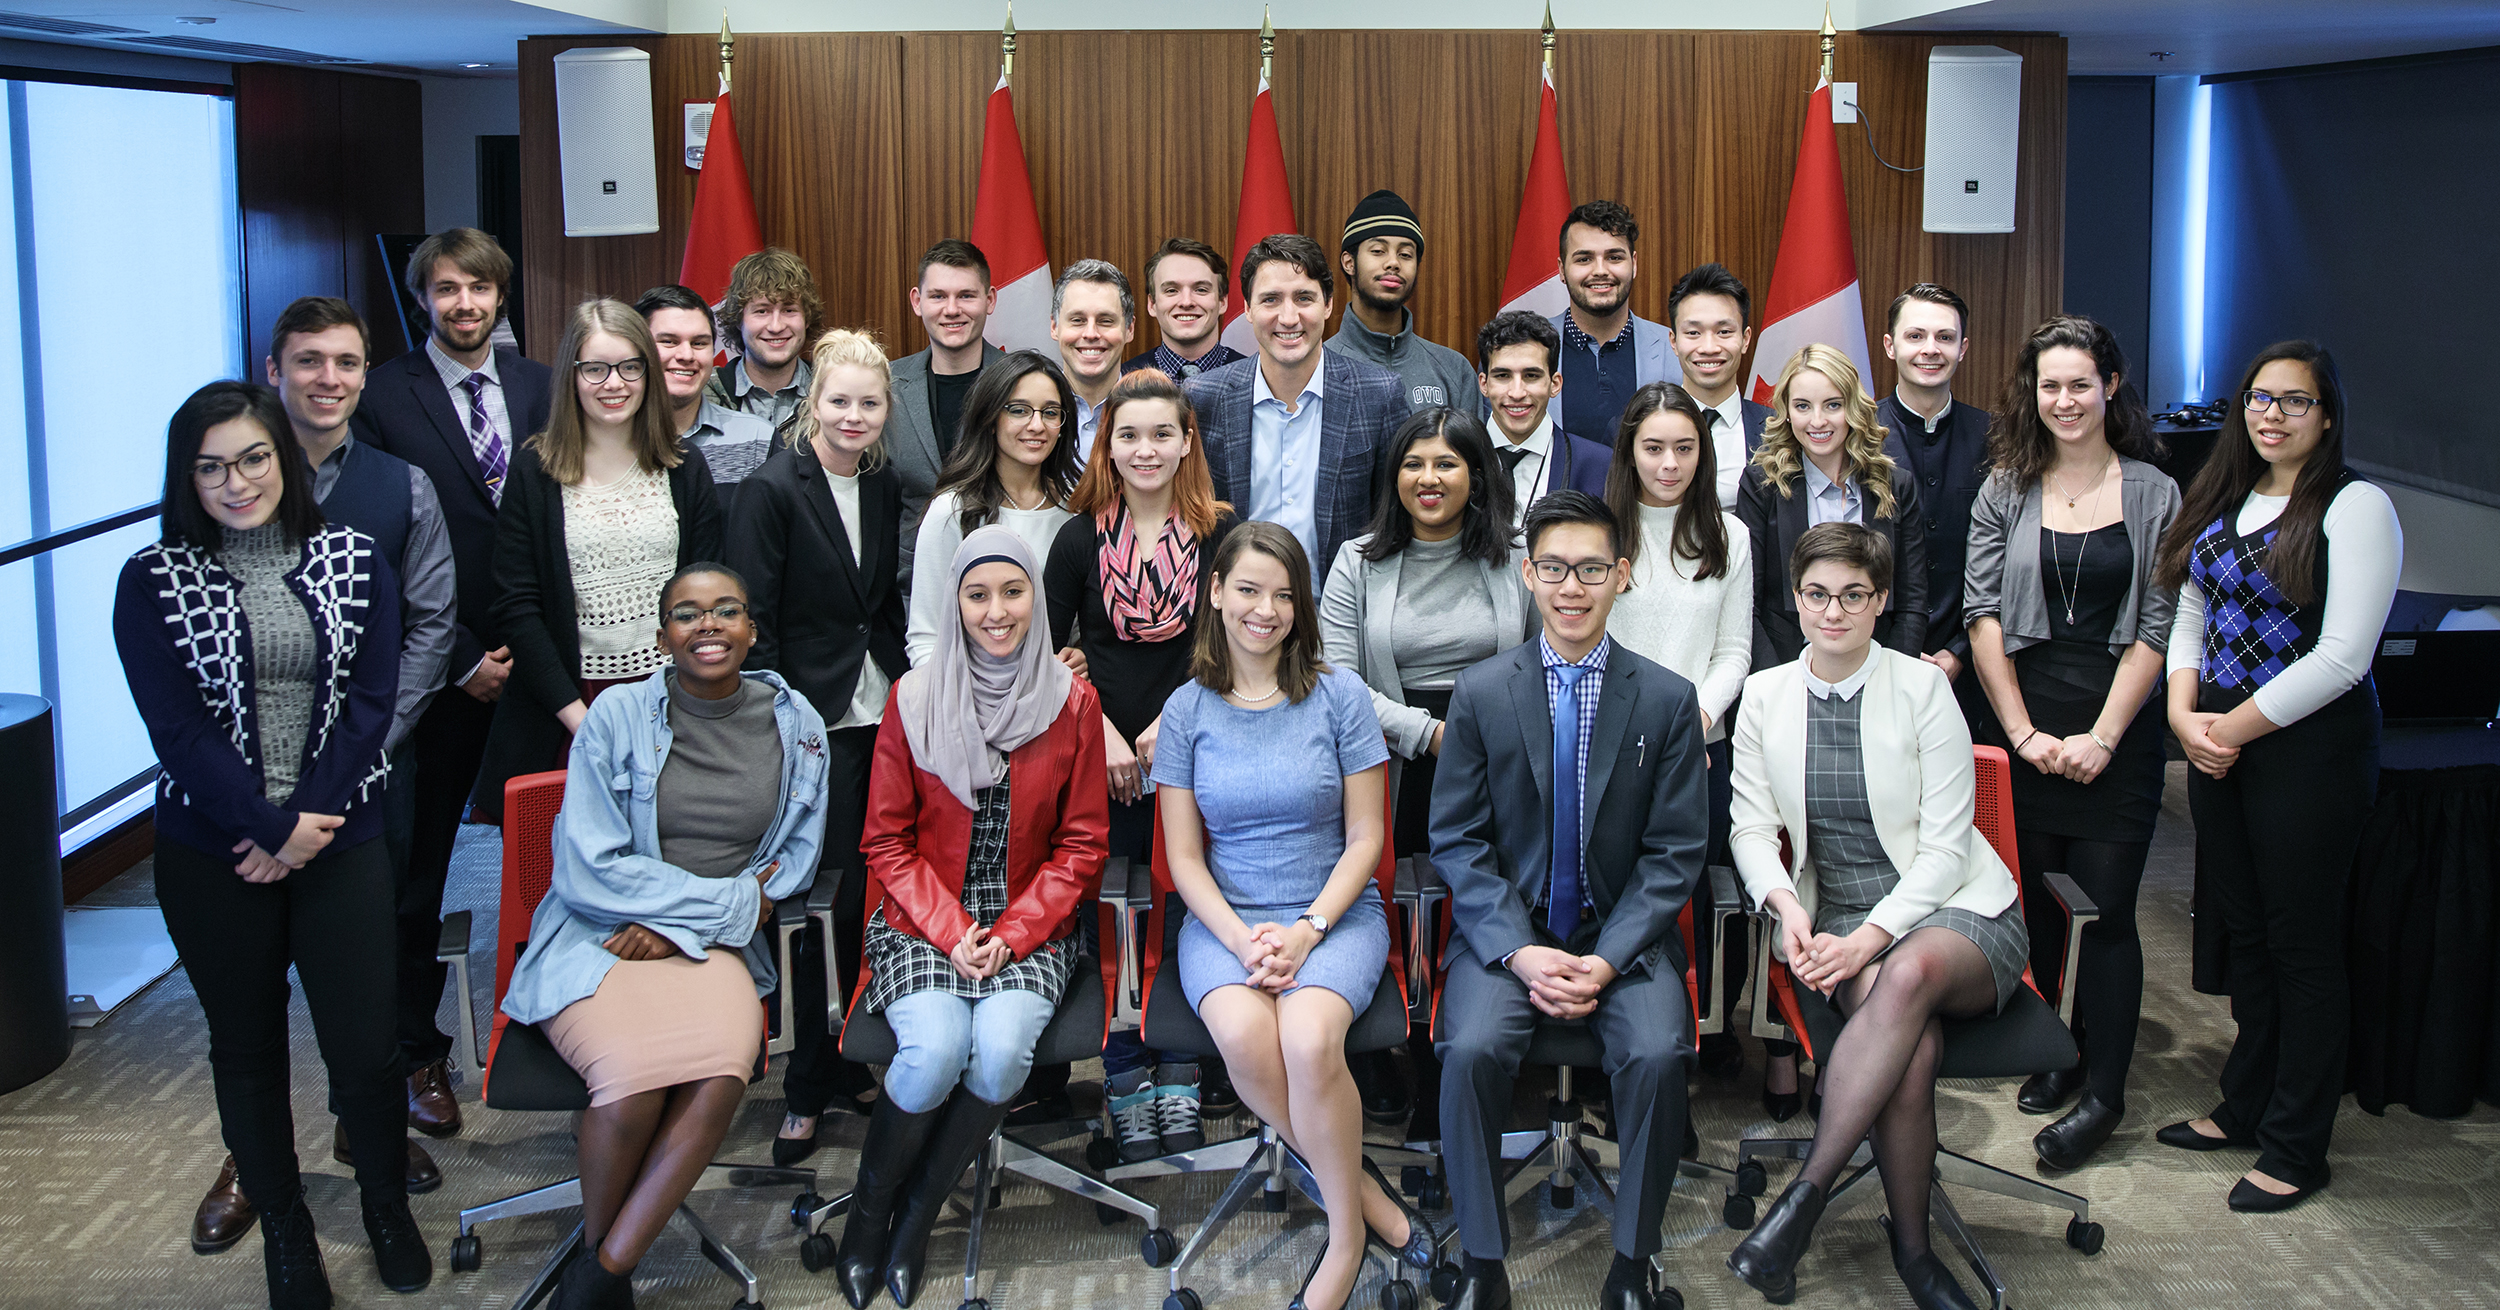 Group shot of the Prime Minister's Youth Council with Prime Minister Trudeau and Parliamentary Secretary Schiefke at the Calgary meeting in January 2017